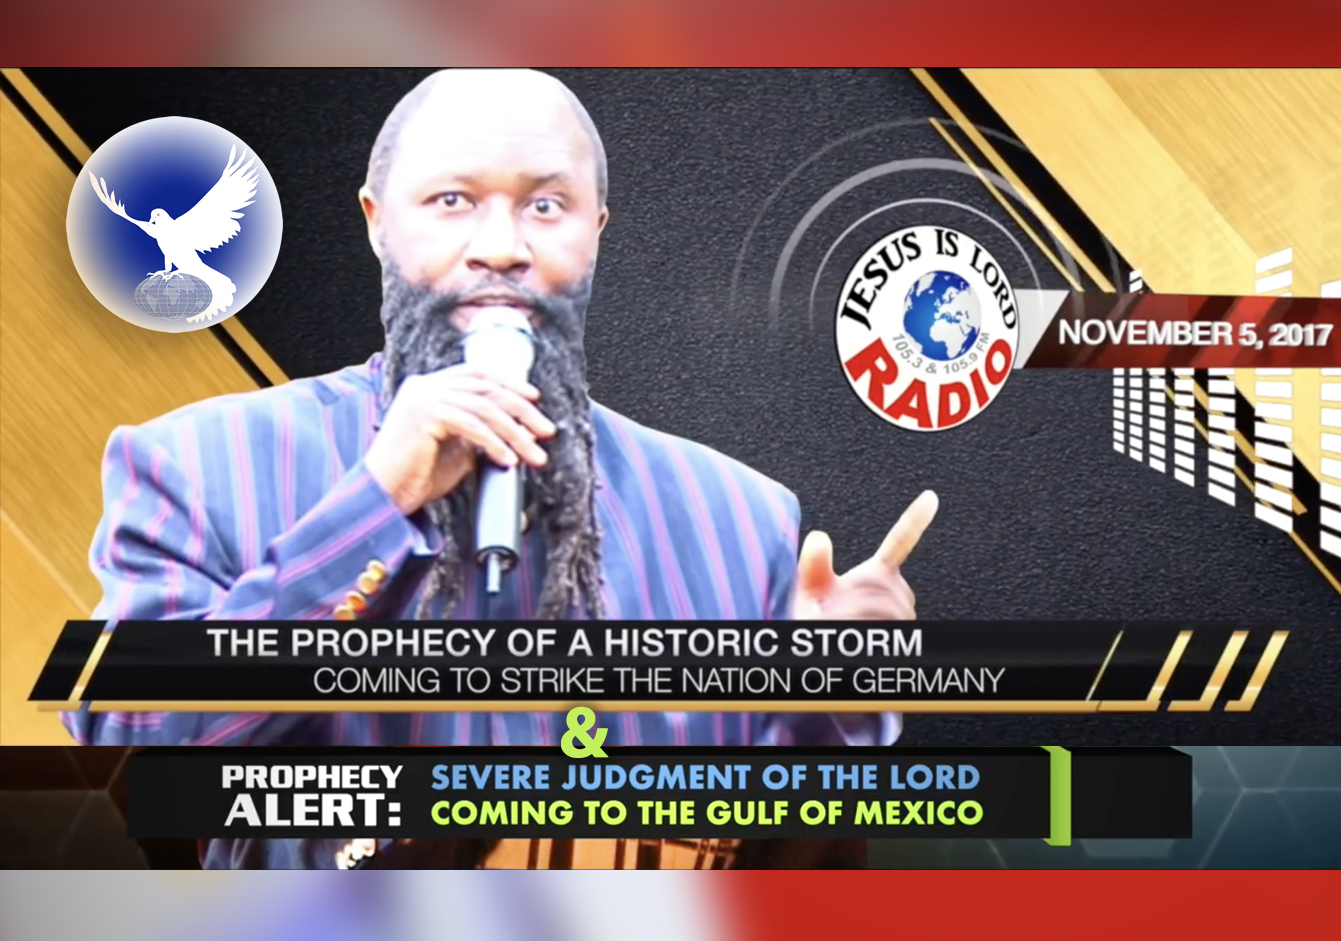 EPISODE 26 - THE PROPHECY OF A HISTORIC STORM COMING TO STRIKE THE NATION OF GERMANY &amp; A SEVERE JUDGMENT OF THE LORD COMING TO THE GULF OF MEXICO (05Nov2017) - PROPHET DR. OWUOR